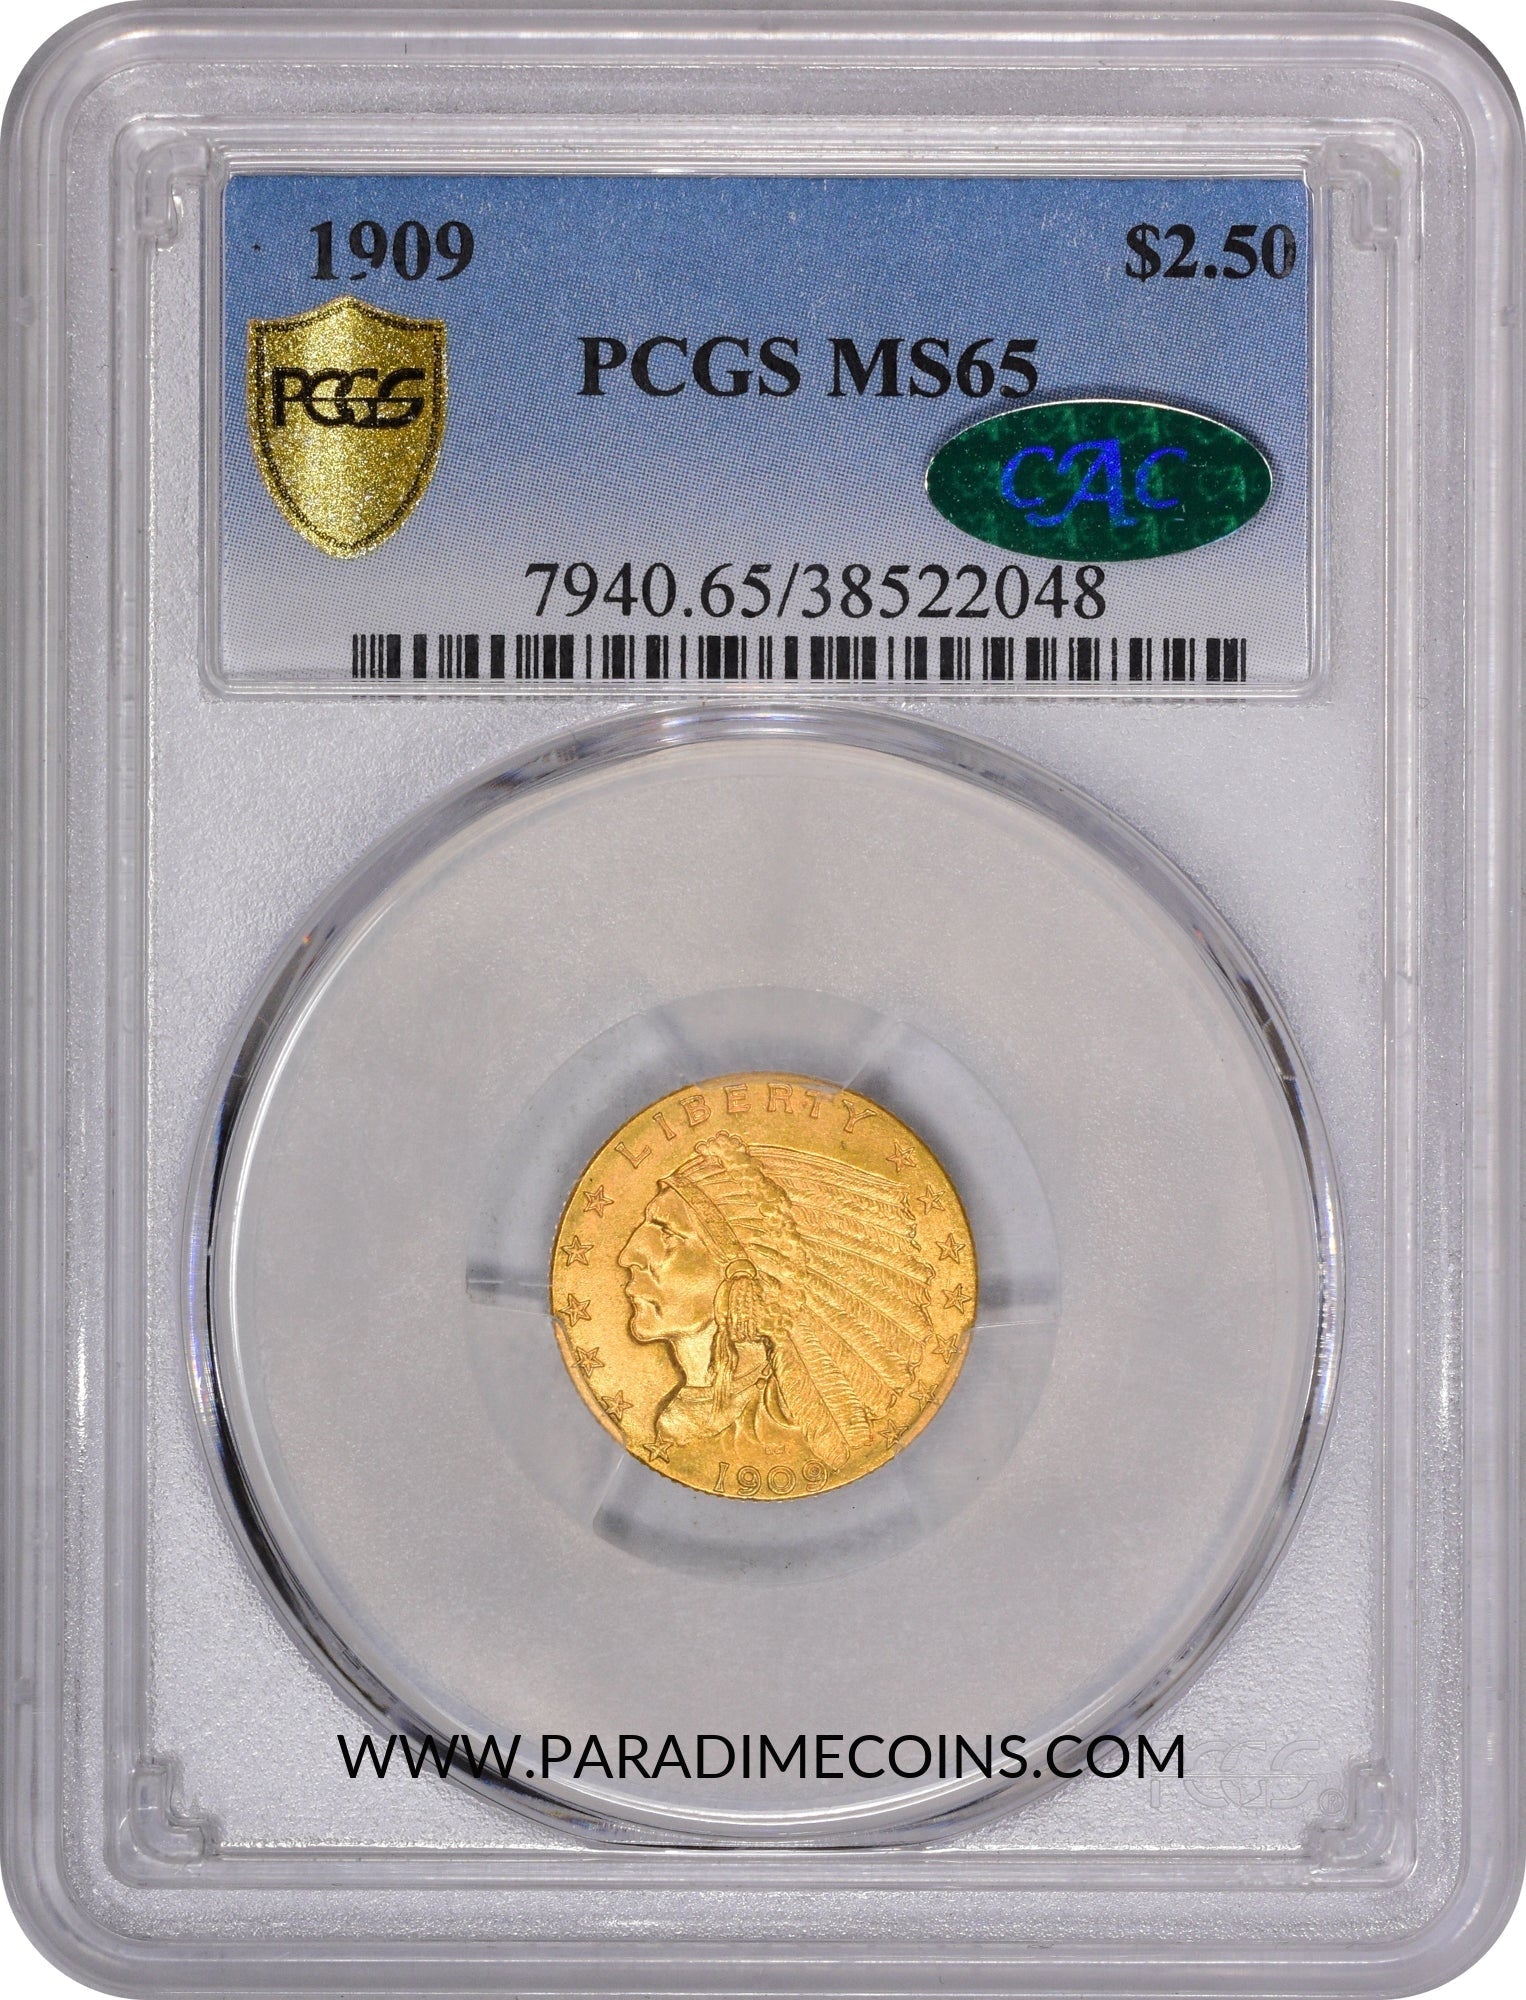 1909 $2.5 MS65 PCGS CAC - Paradime Coins | PCGS NGC CACG CAC Rare US Numismatic Coins For Sale